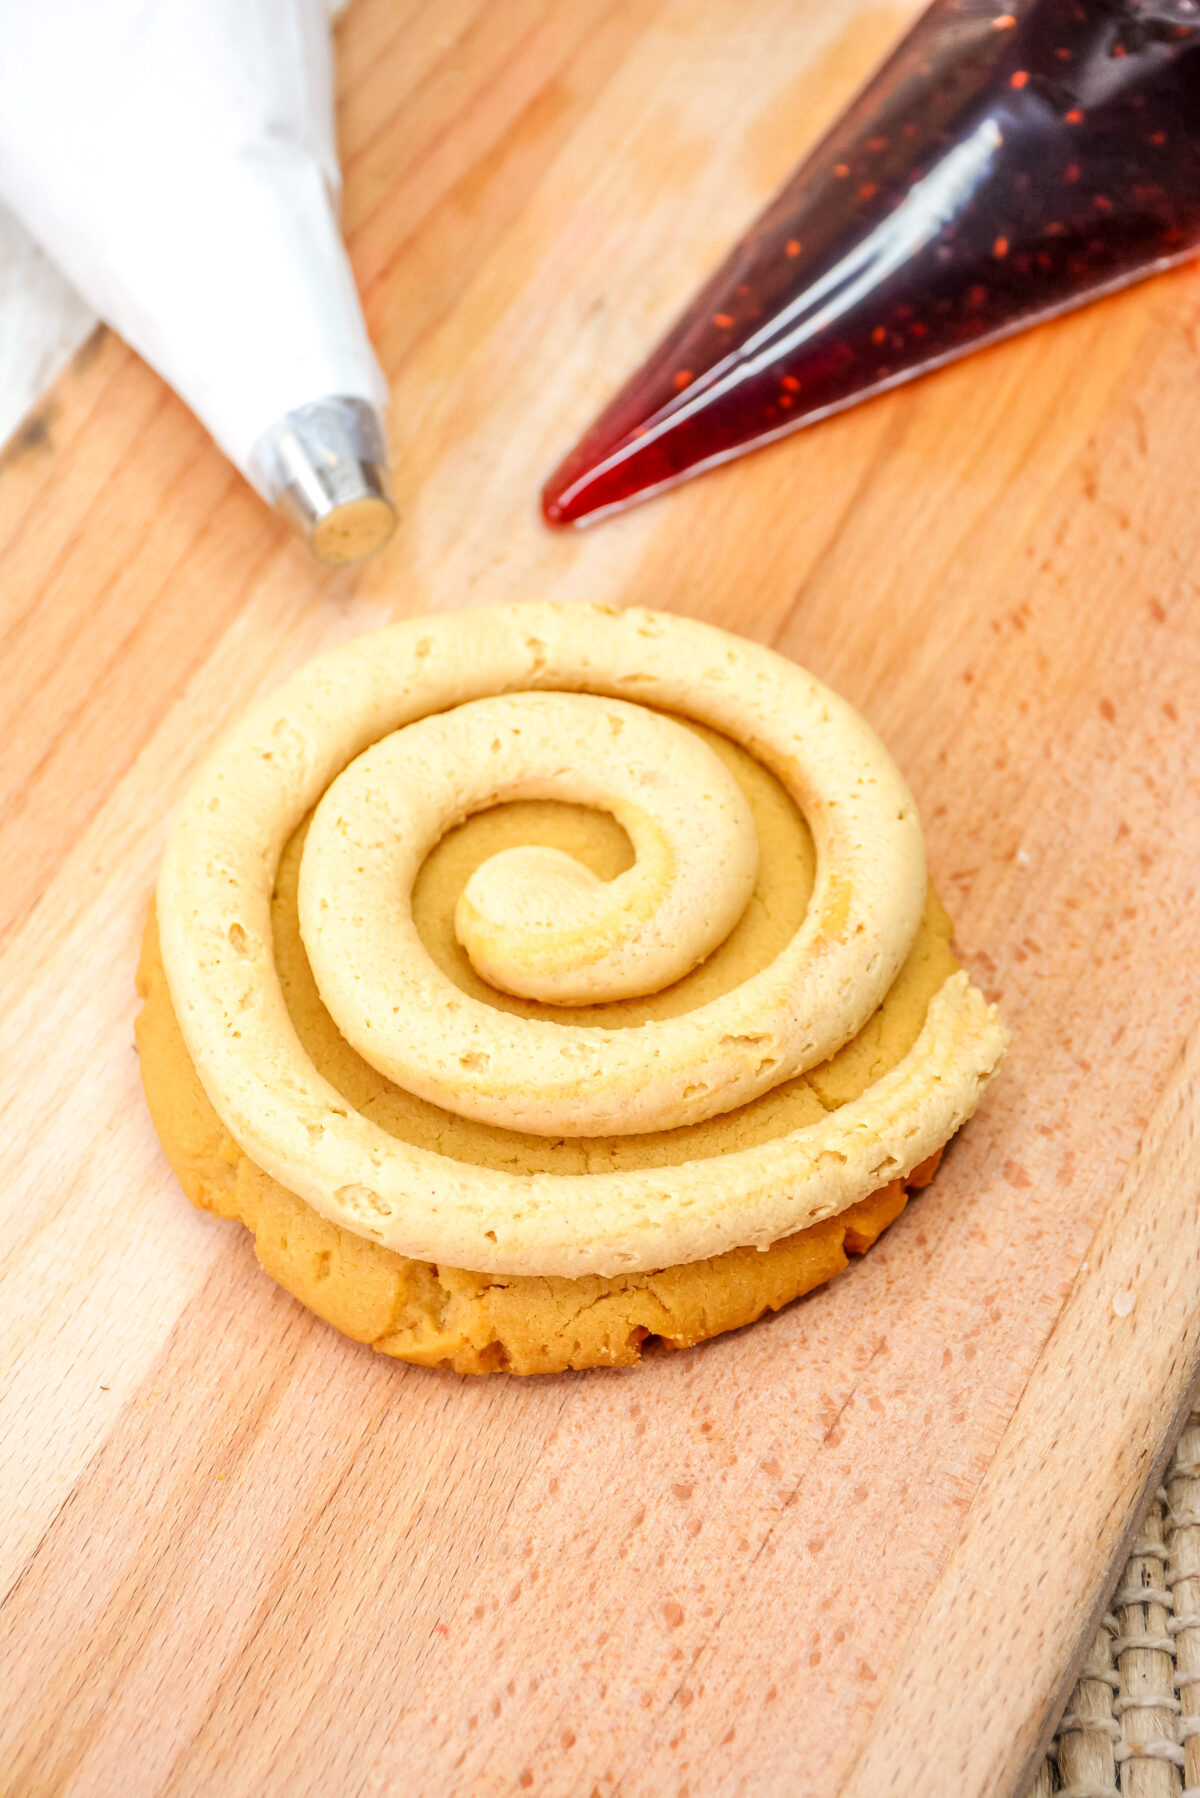 Frosting the peanut butter cookie with a large spiral of peanut butter frosting.